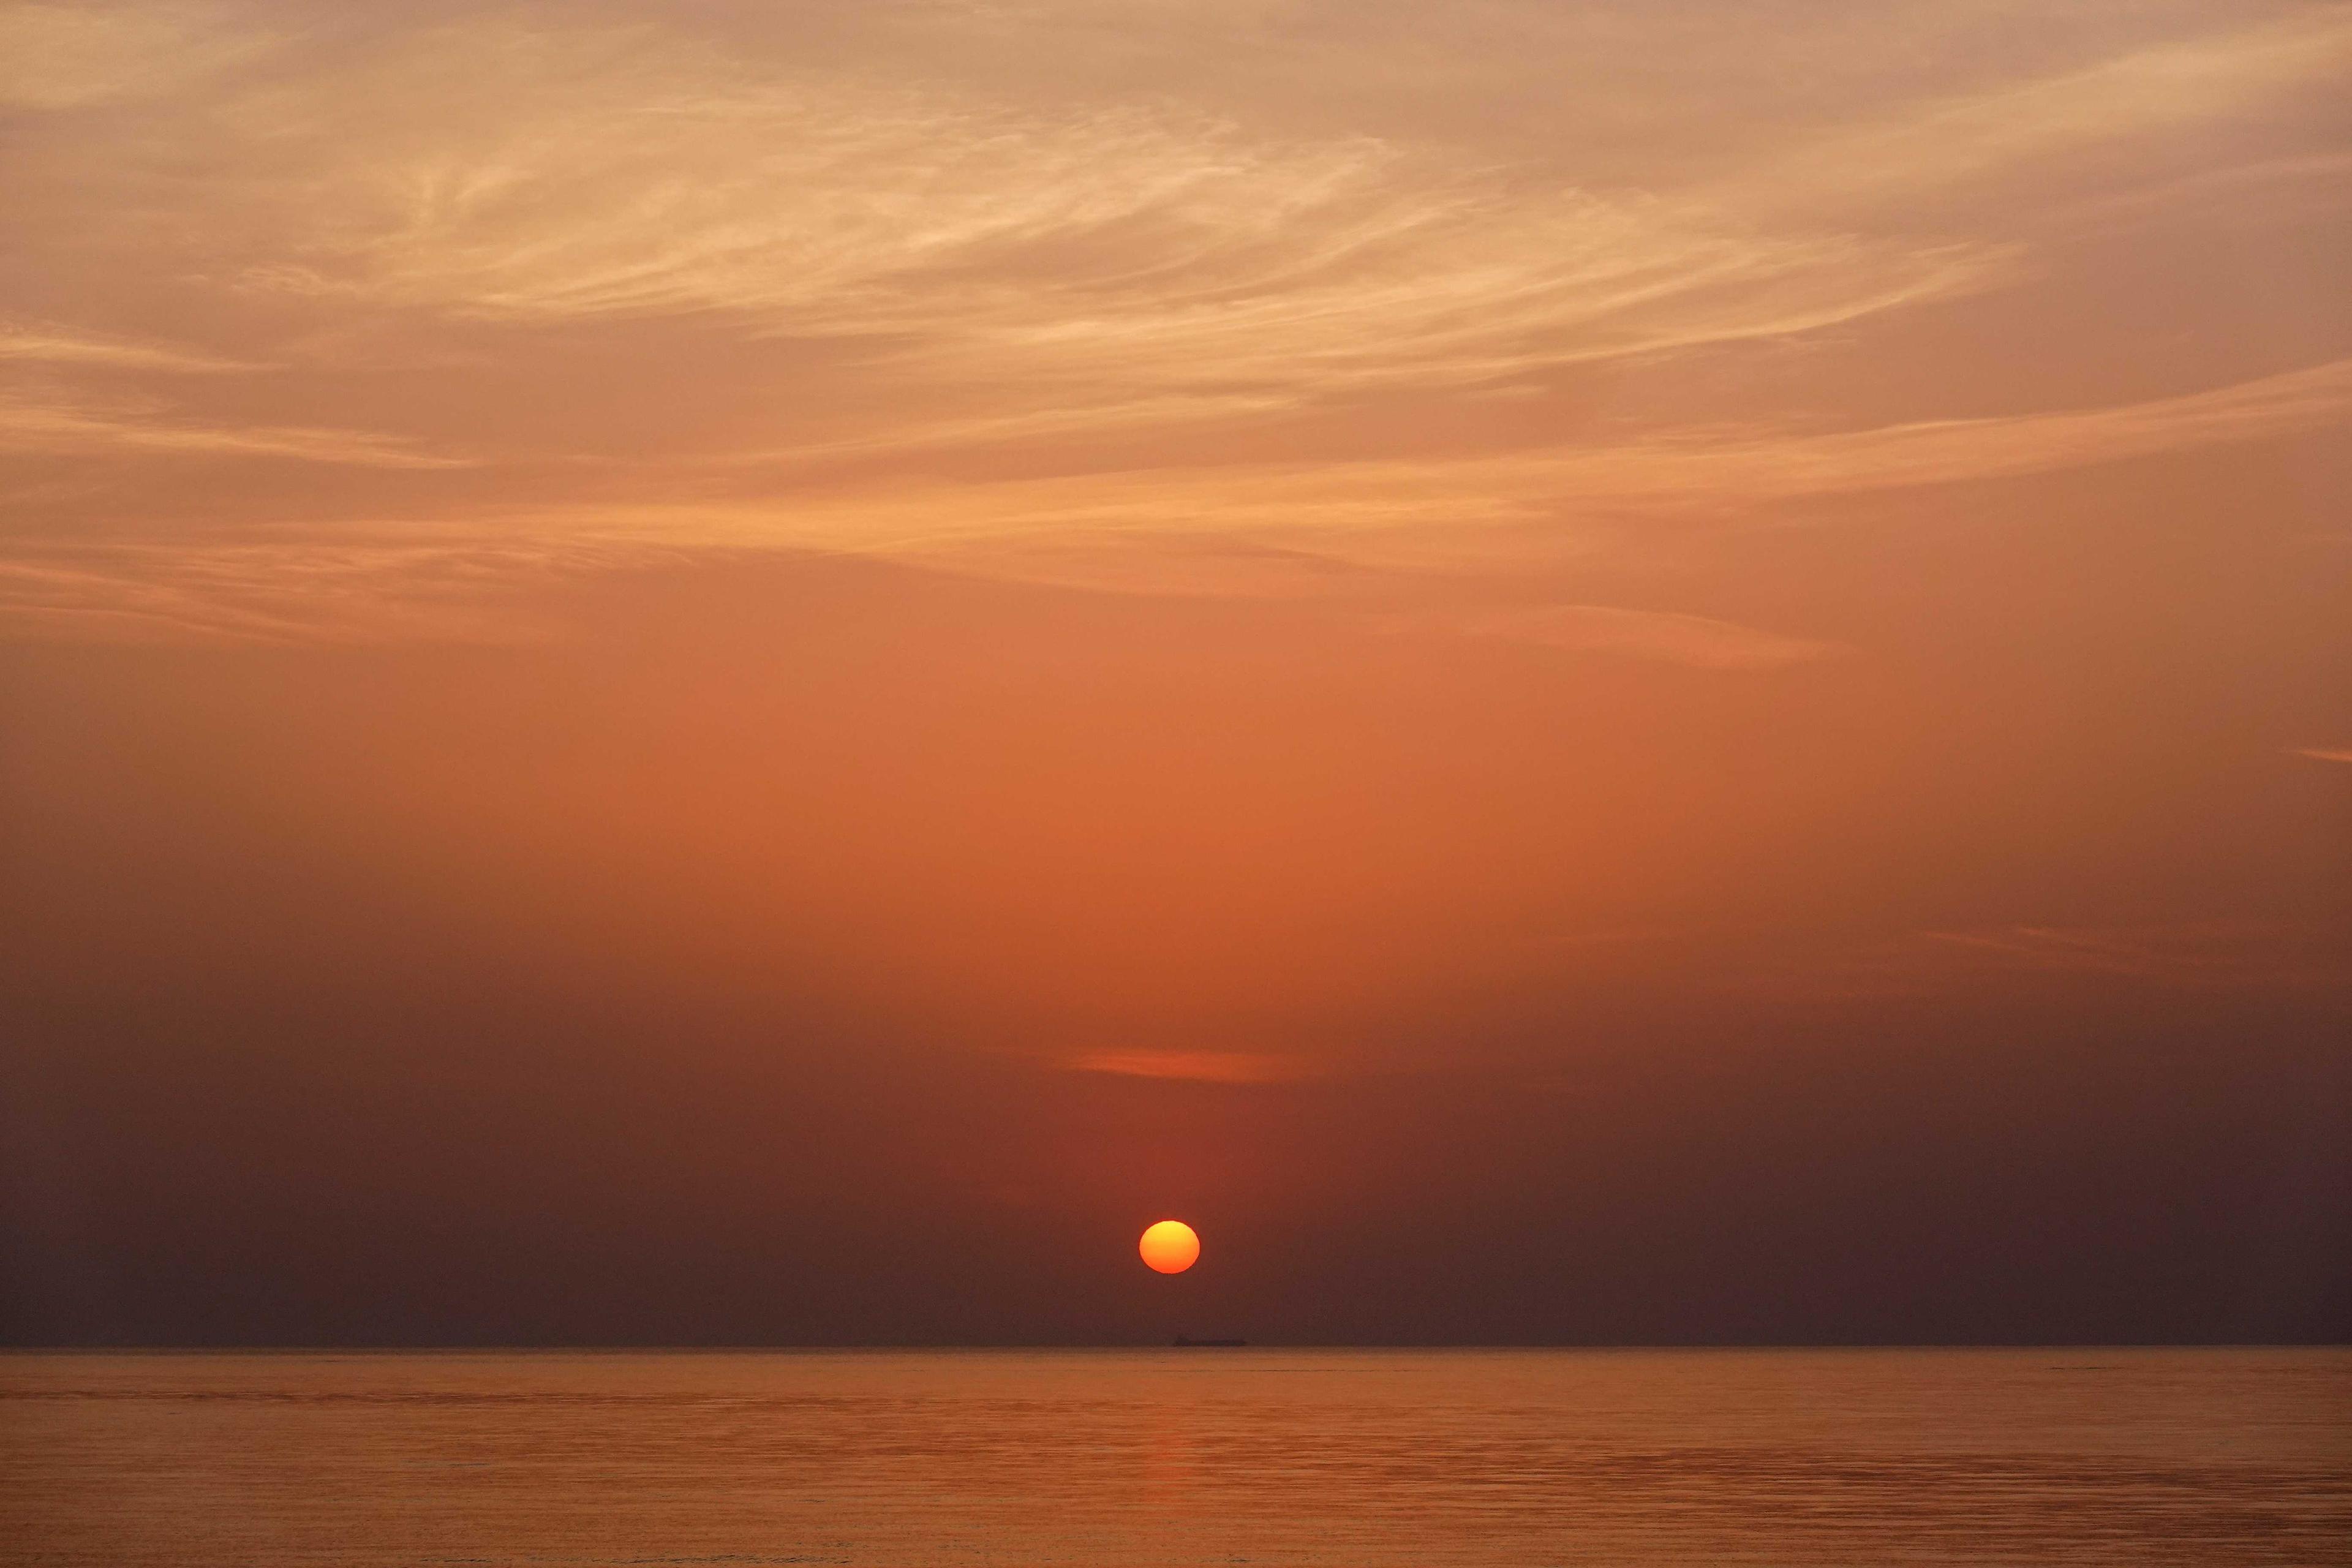 The sun rises over the Indian Ocean in As Sifah, Oman, April 23. Photo: Reuters